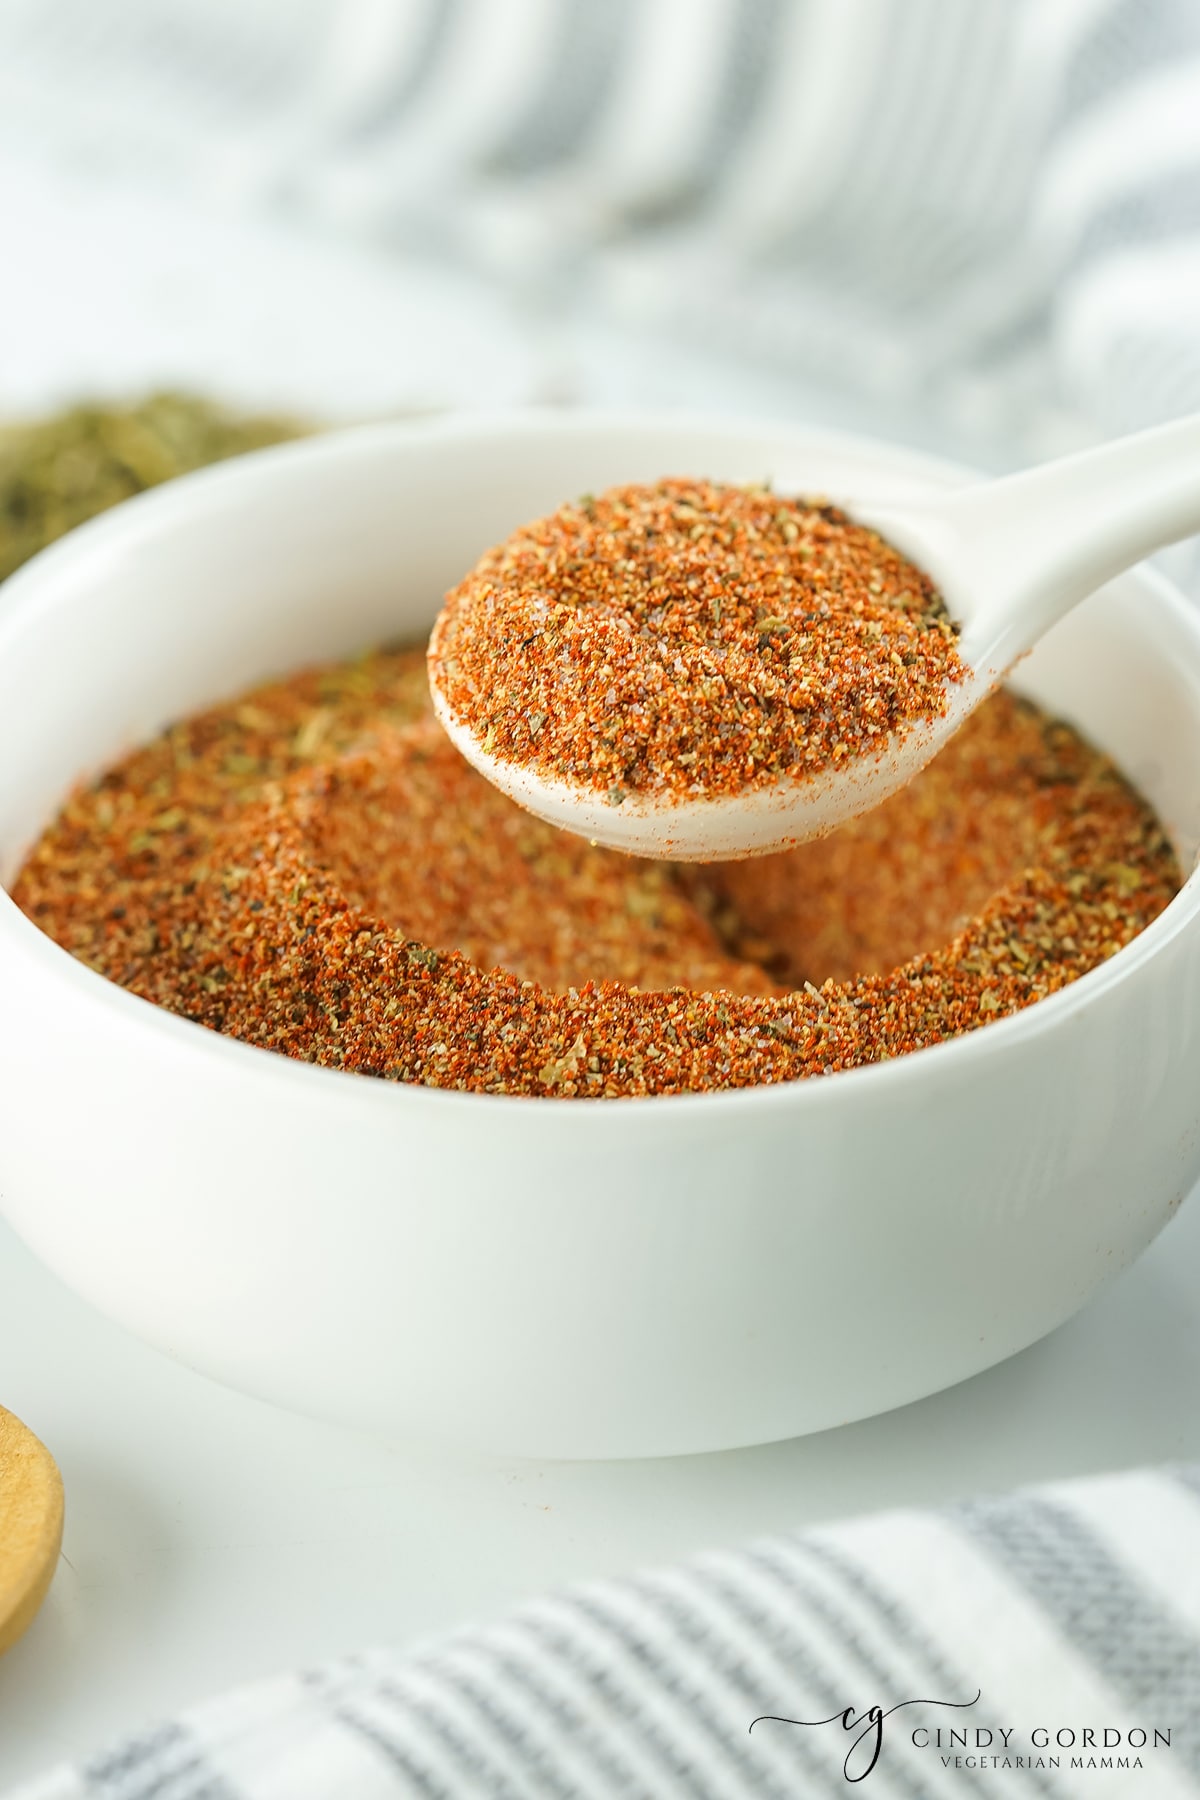 a bowl of cajun seasoning. A white spoon is holding up a portion.